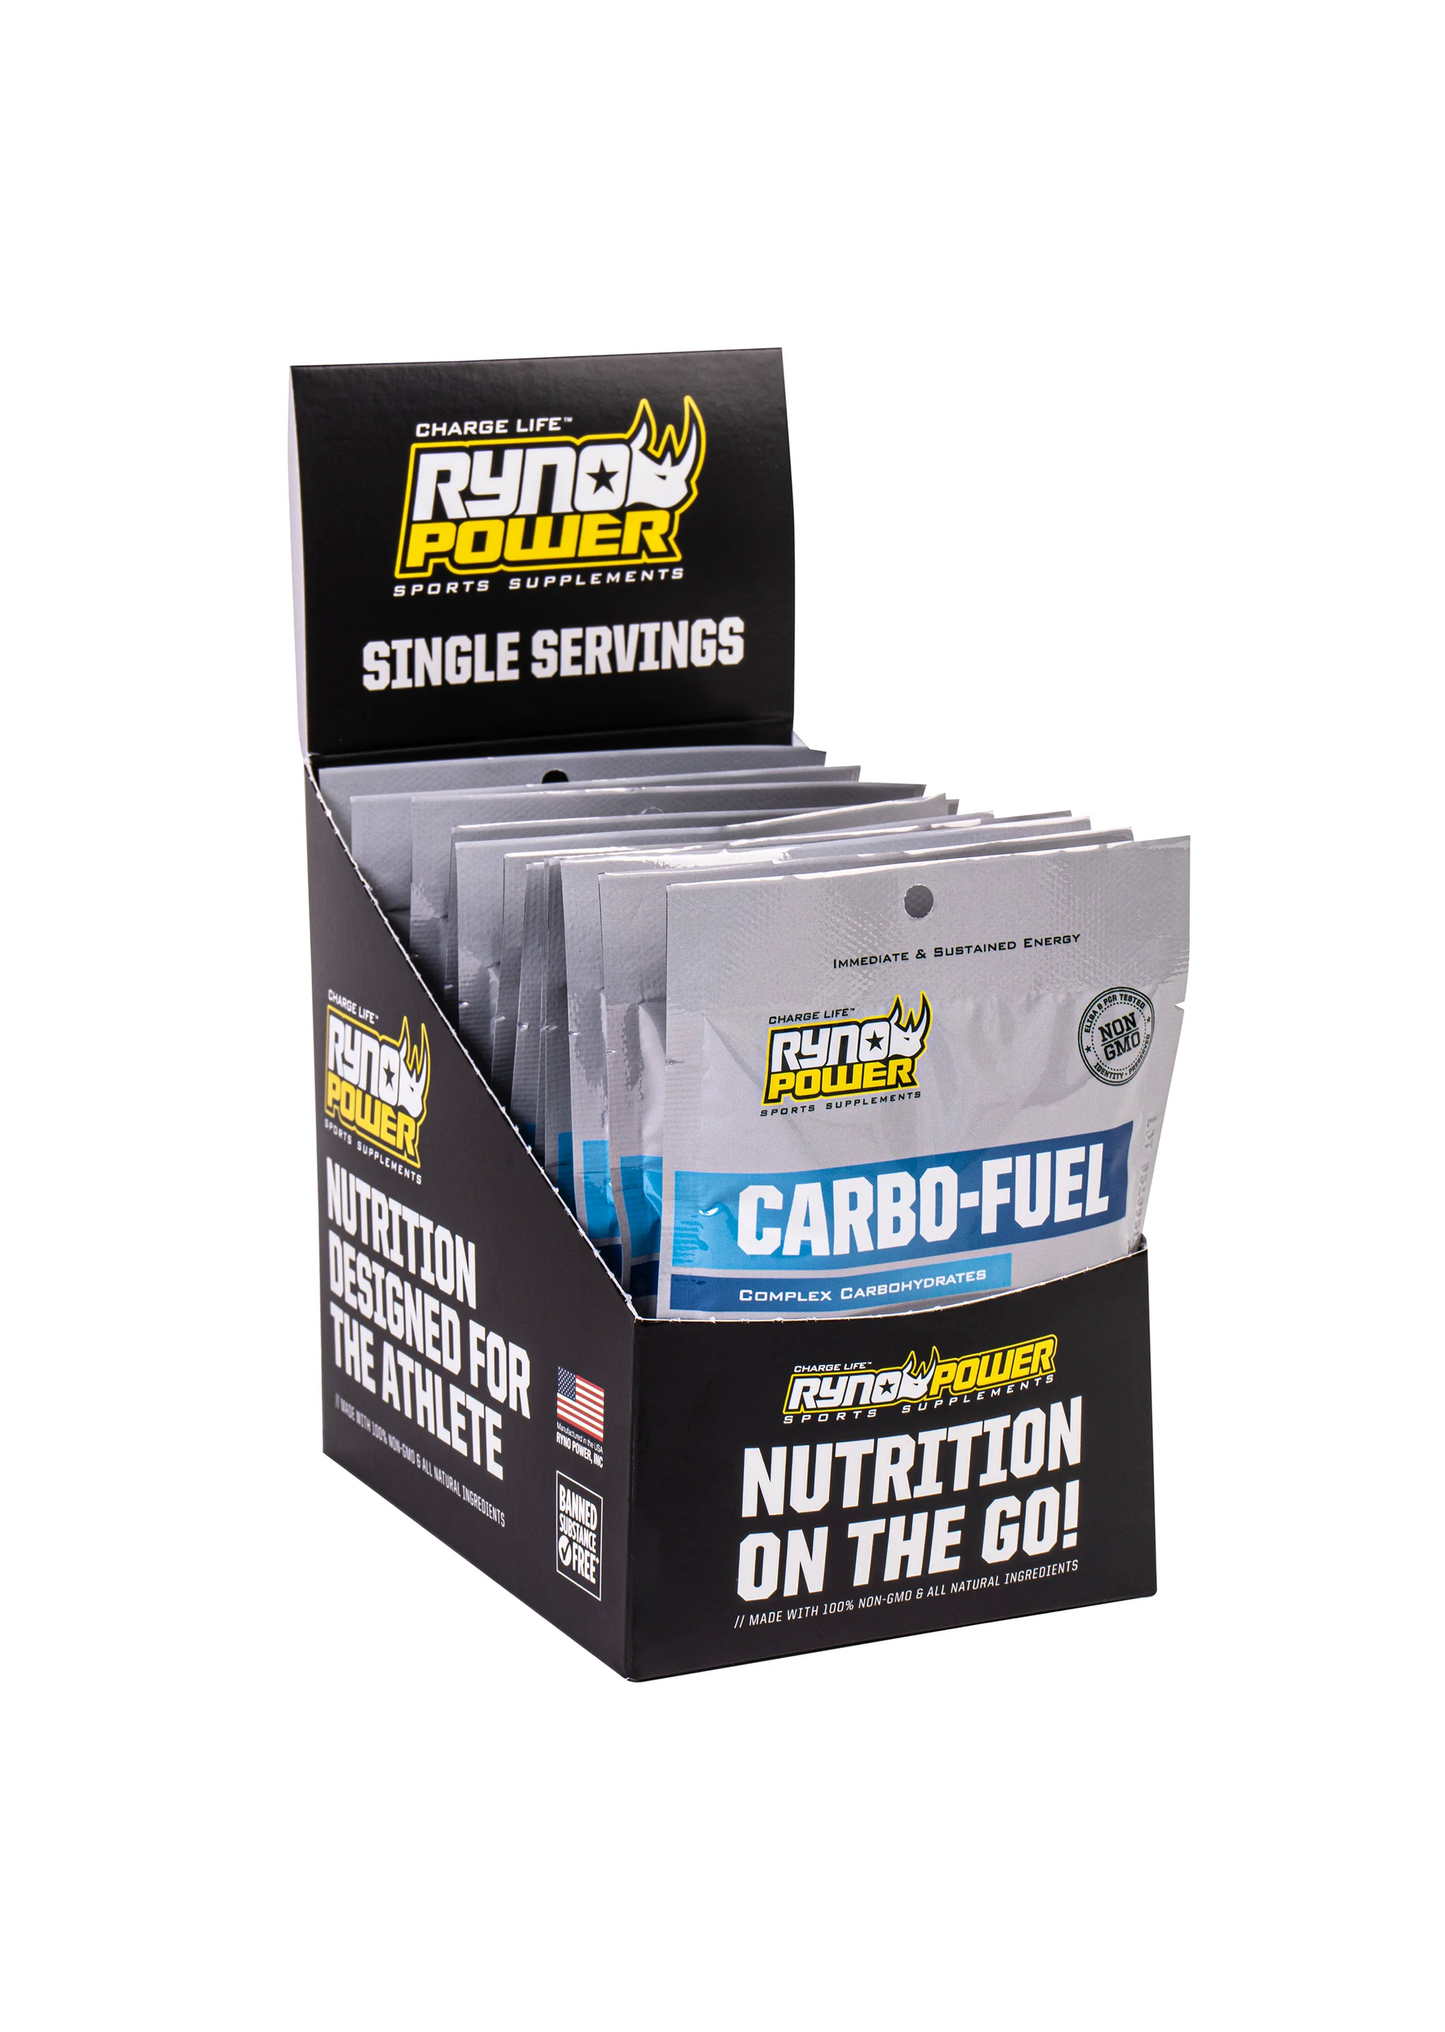 CARBO-FUEL STIMULANT-FREE DRINK MIX